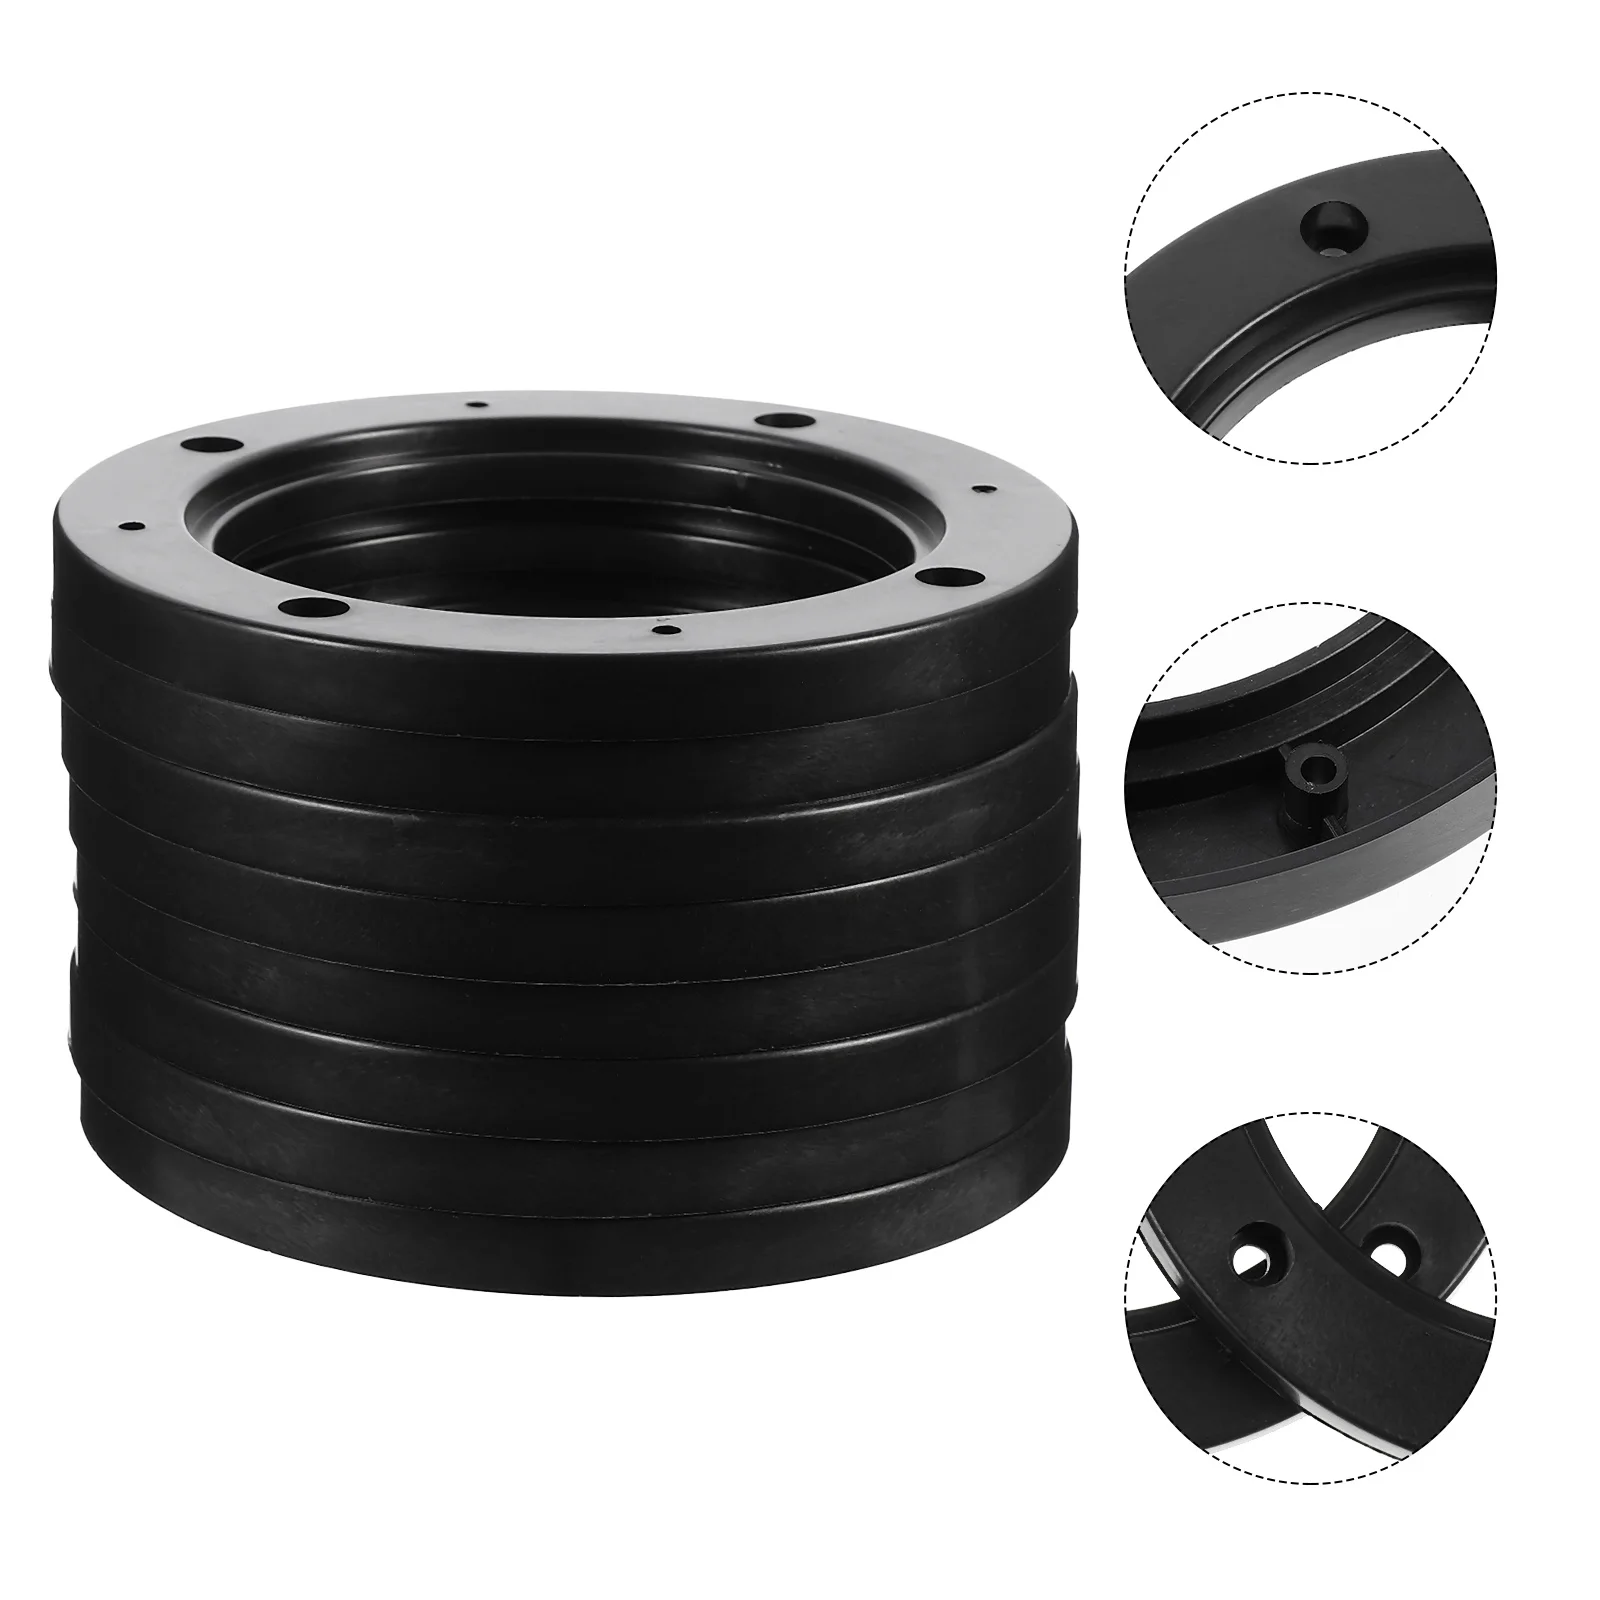 

Speaker Adapter Ring Car Auto Vehicles Audio Spacers Washer Rings Spacer Mounting Mount Plastic Depth